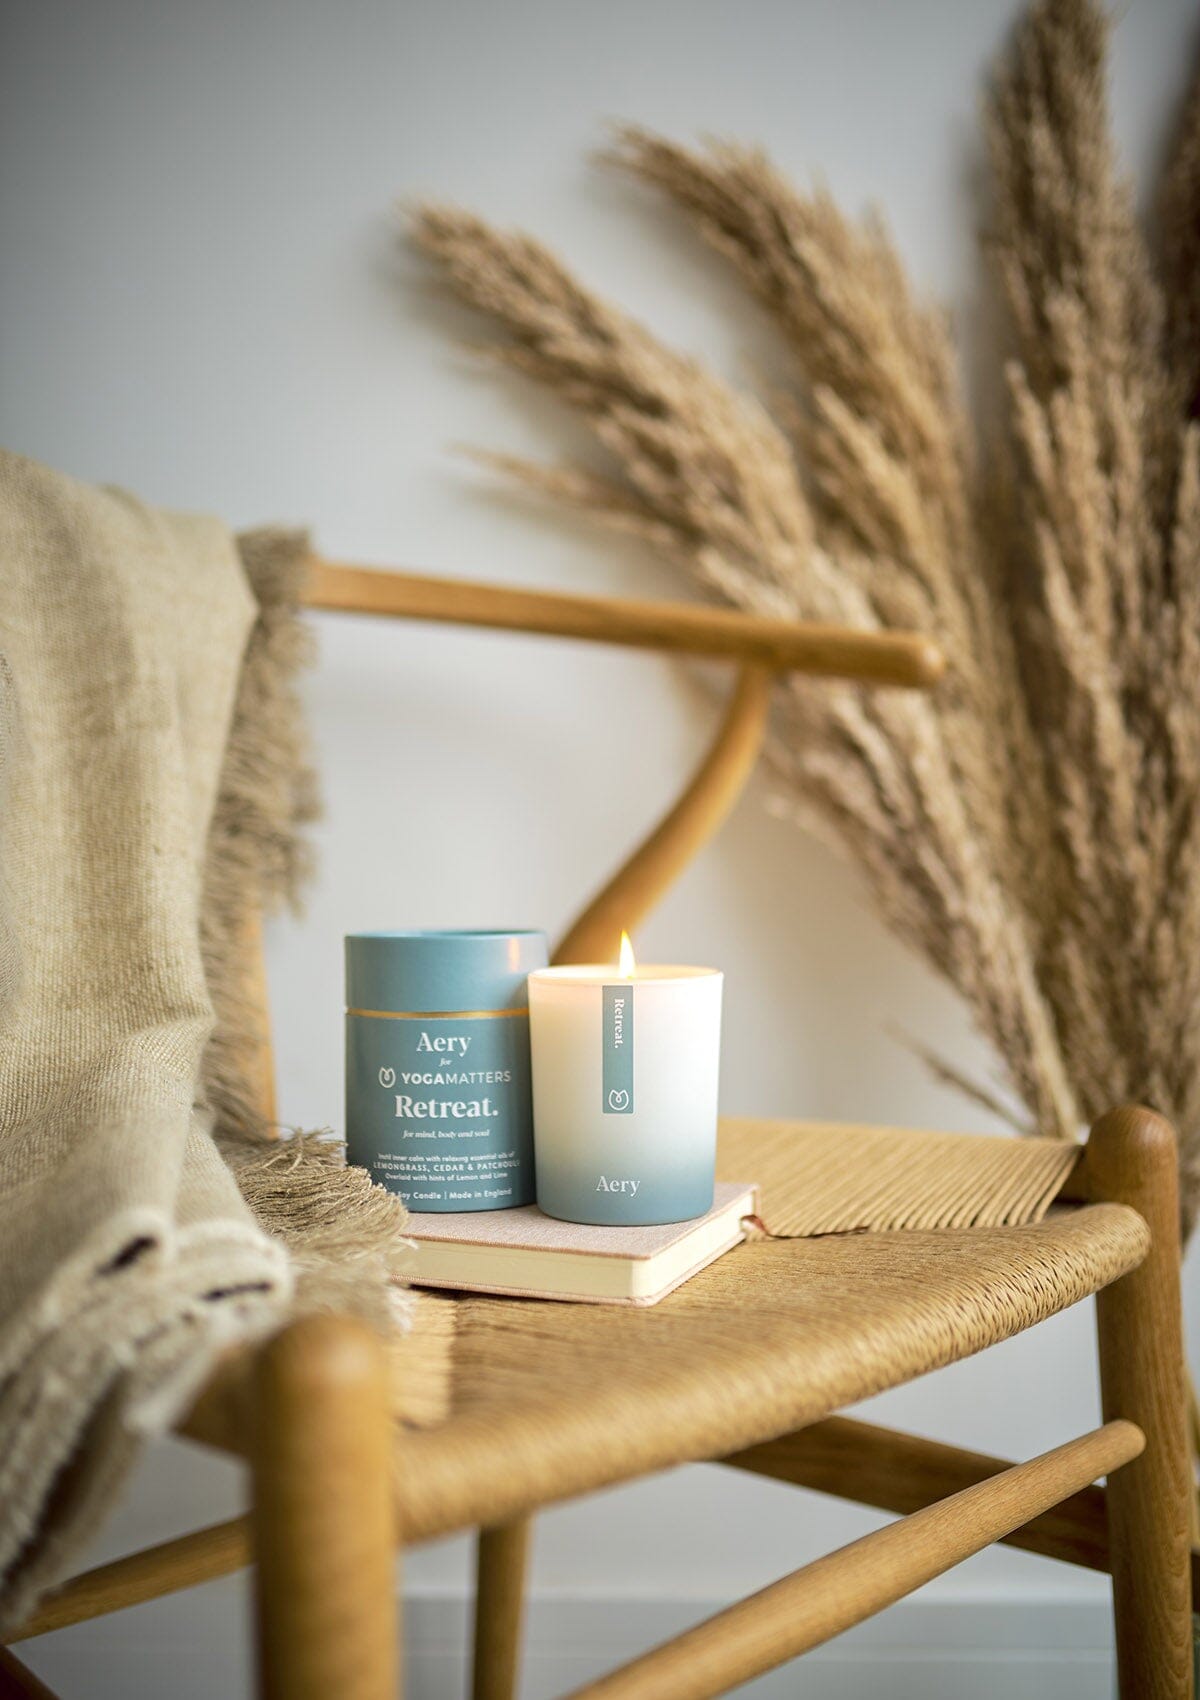 Blue Retreat candle by Aery displayed next to product packaging on wicker chair 